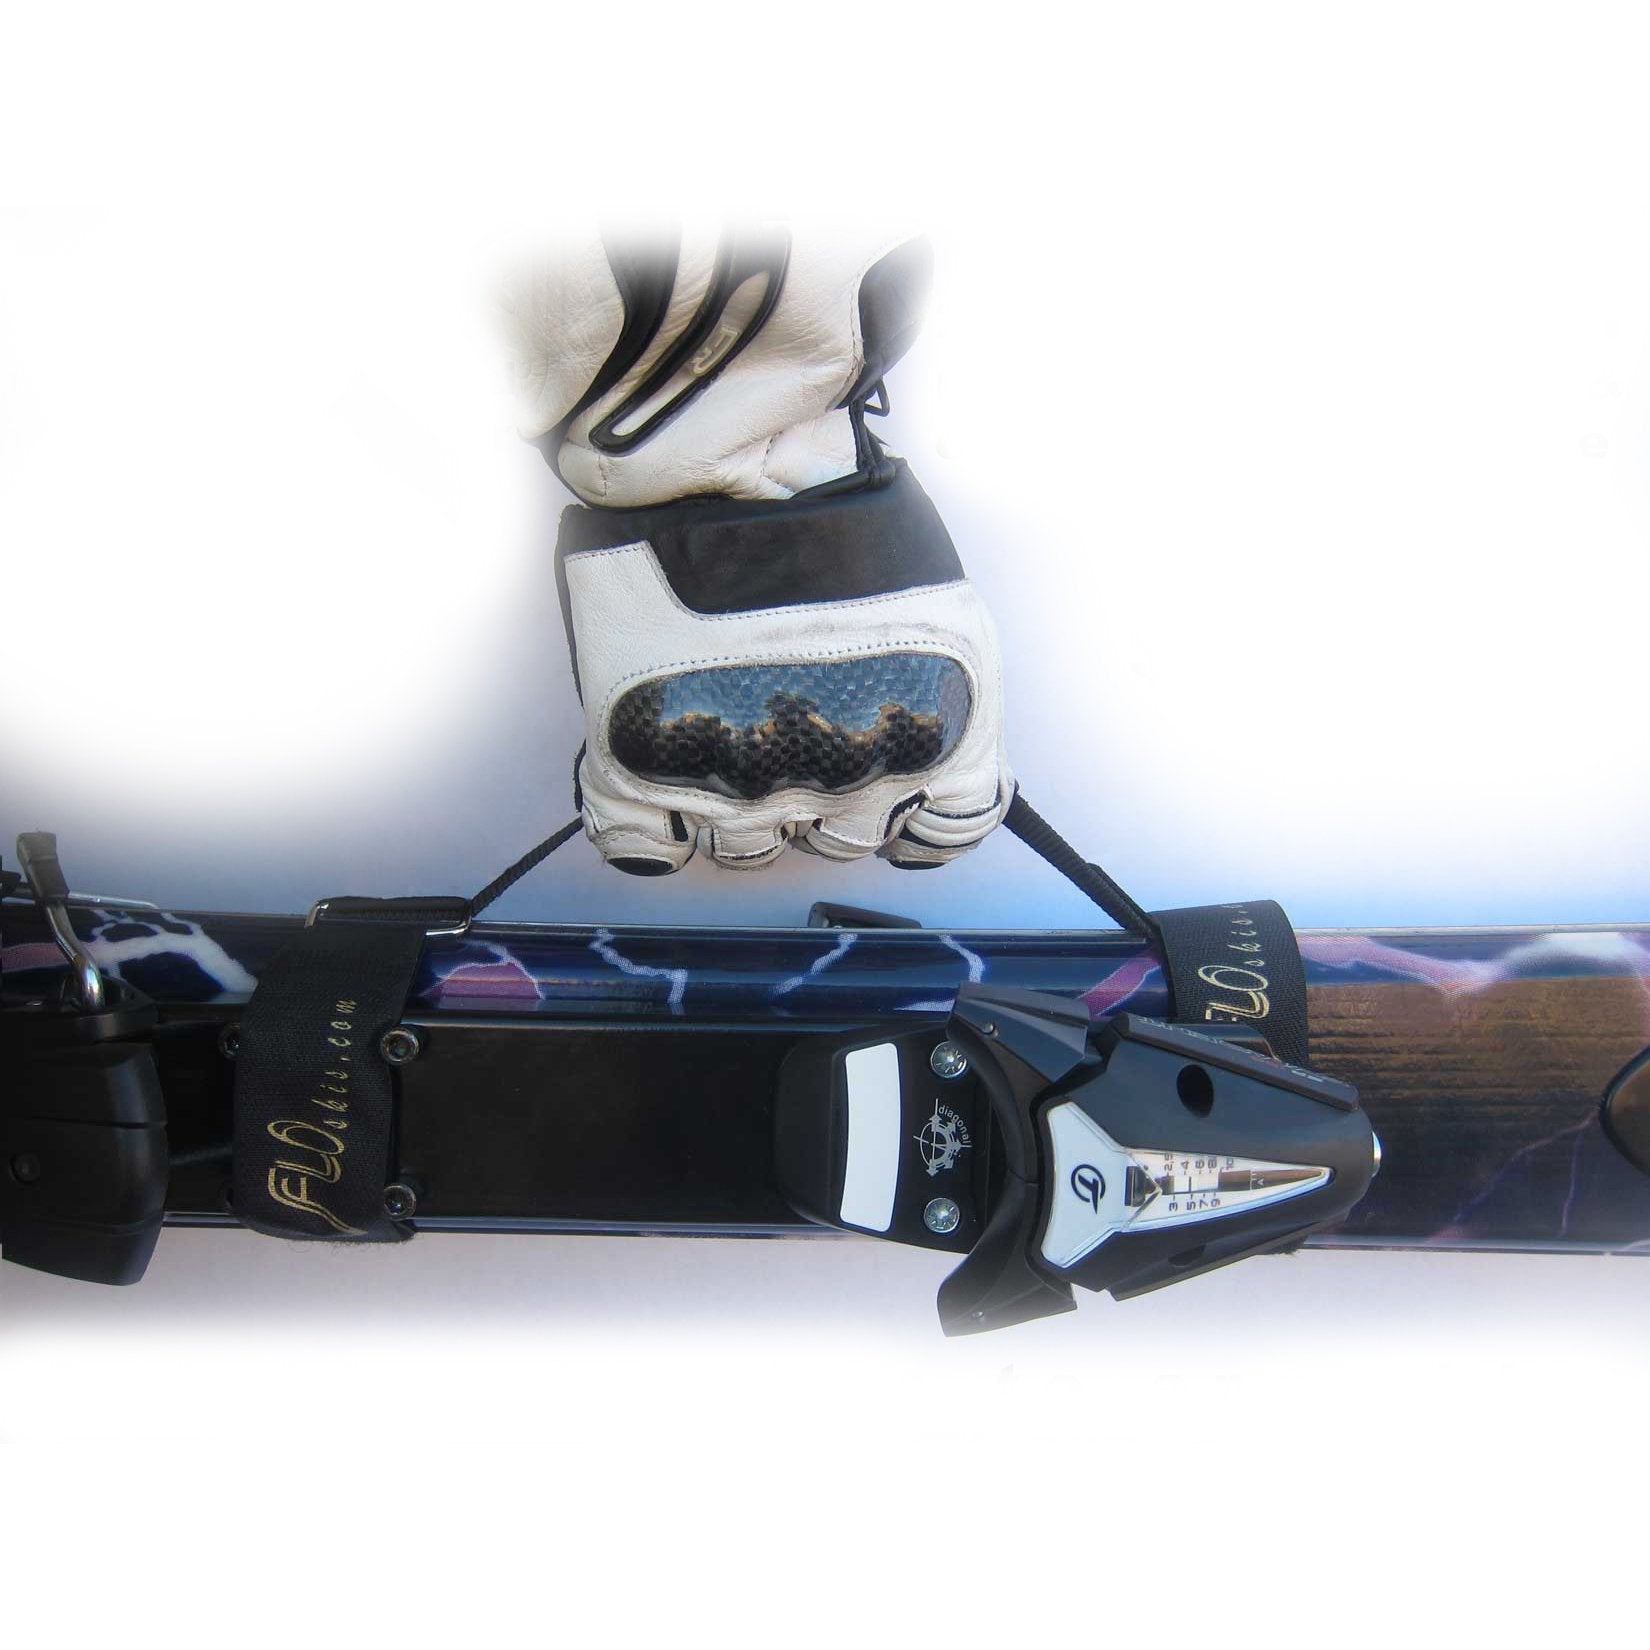 ski boot carrier handle, ski and boot carrier, ski boot carrier strap, ski boot holder, ski boot carrying strap, ski boot carry straps, Carrying Handle for Skis & Boots, ski carrier, ski straps, ski strap